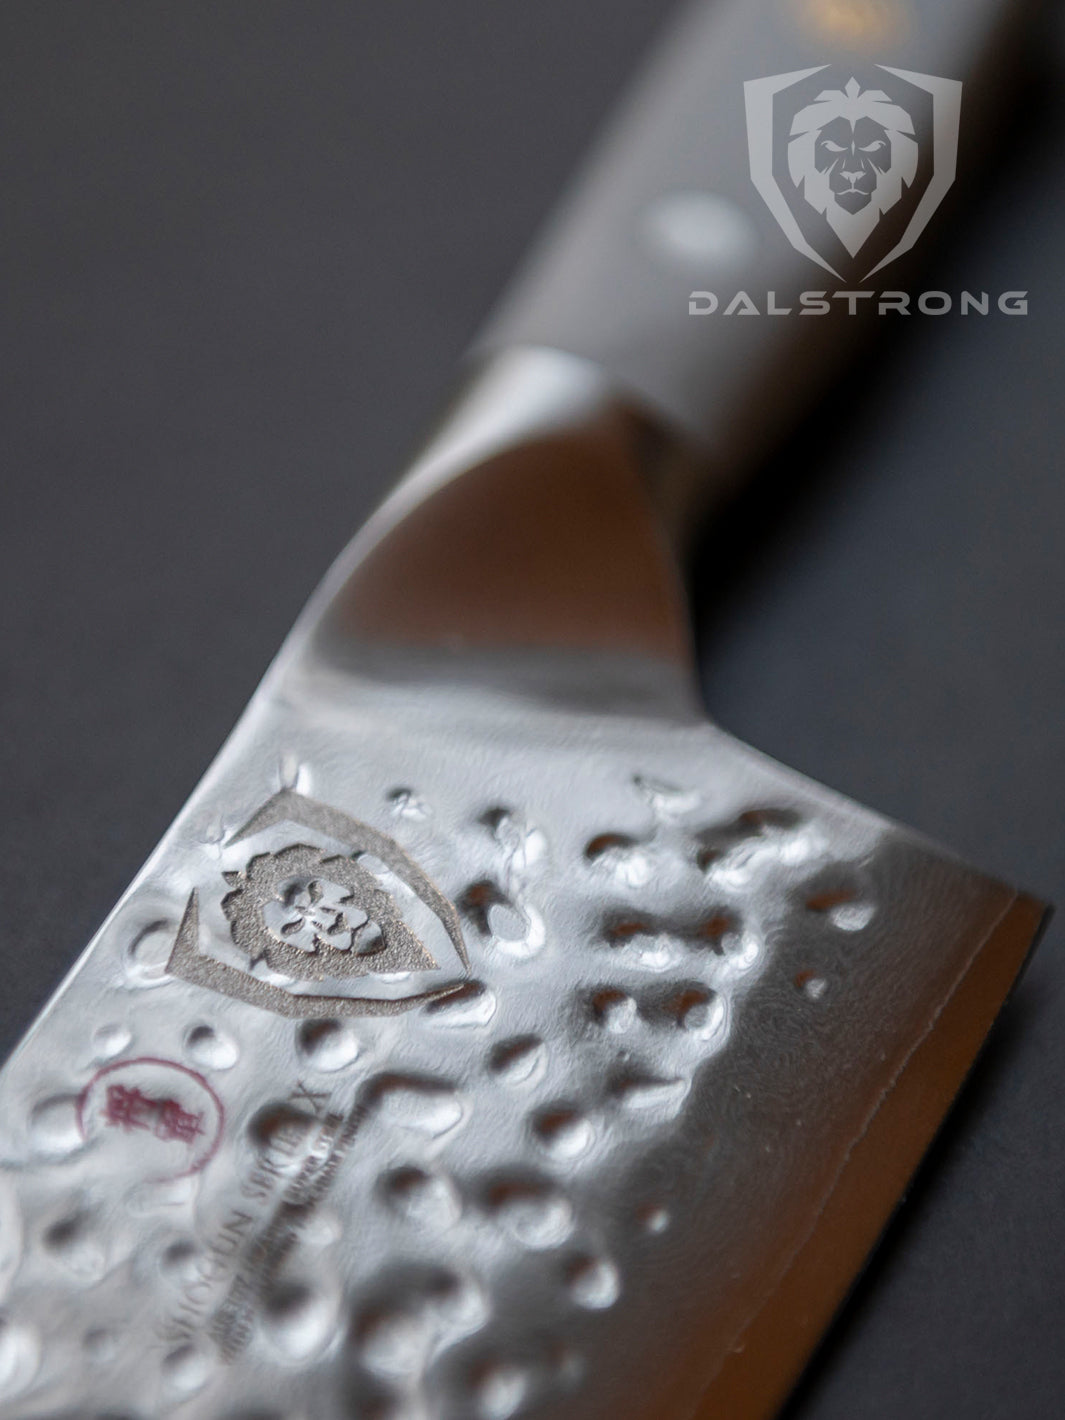 Dalstrong shogun series 8 inch chef knife with gray matte handle and logo of Dalstrong.